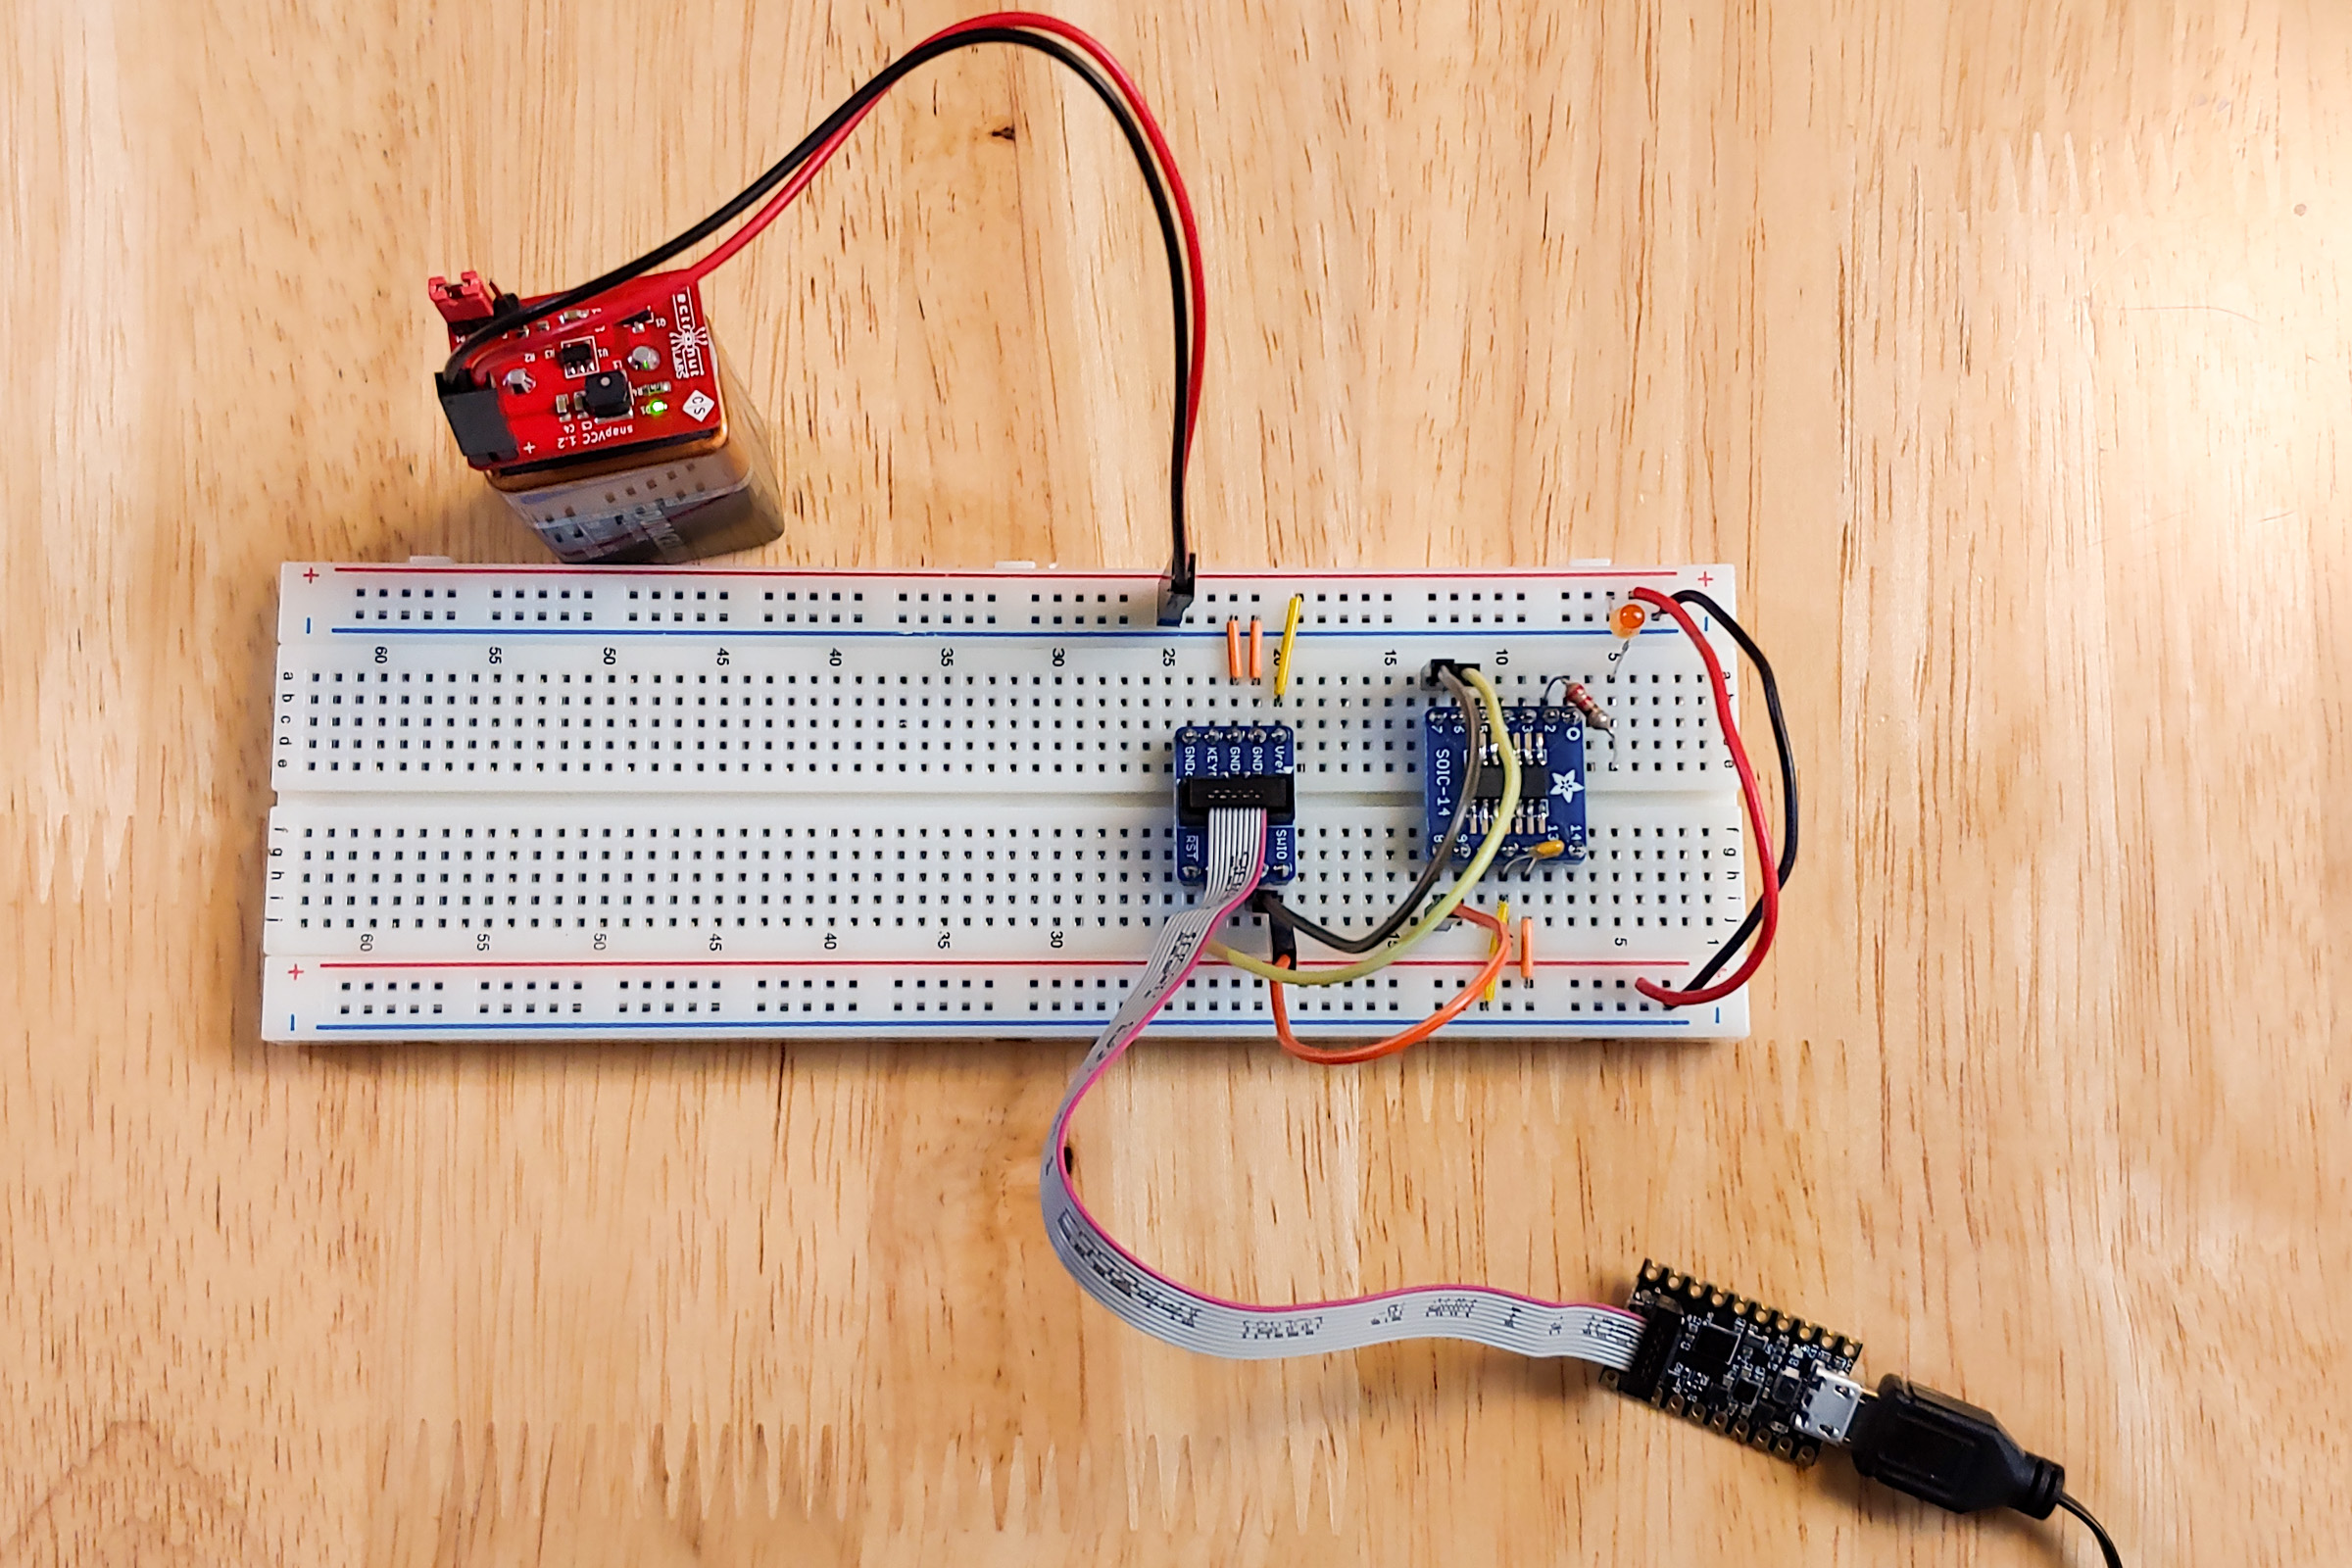 3.3V power and CMSIS-DAP debugger connected to breadboard project.